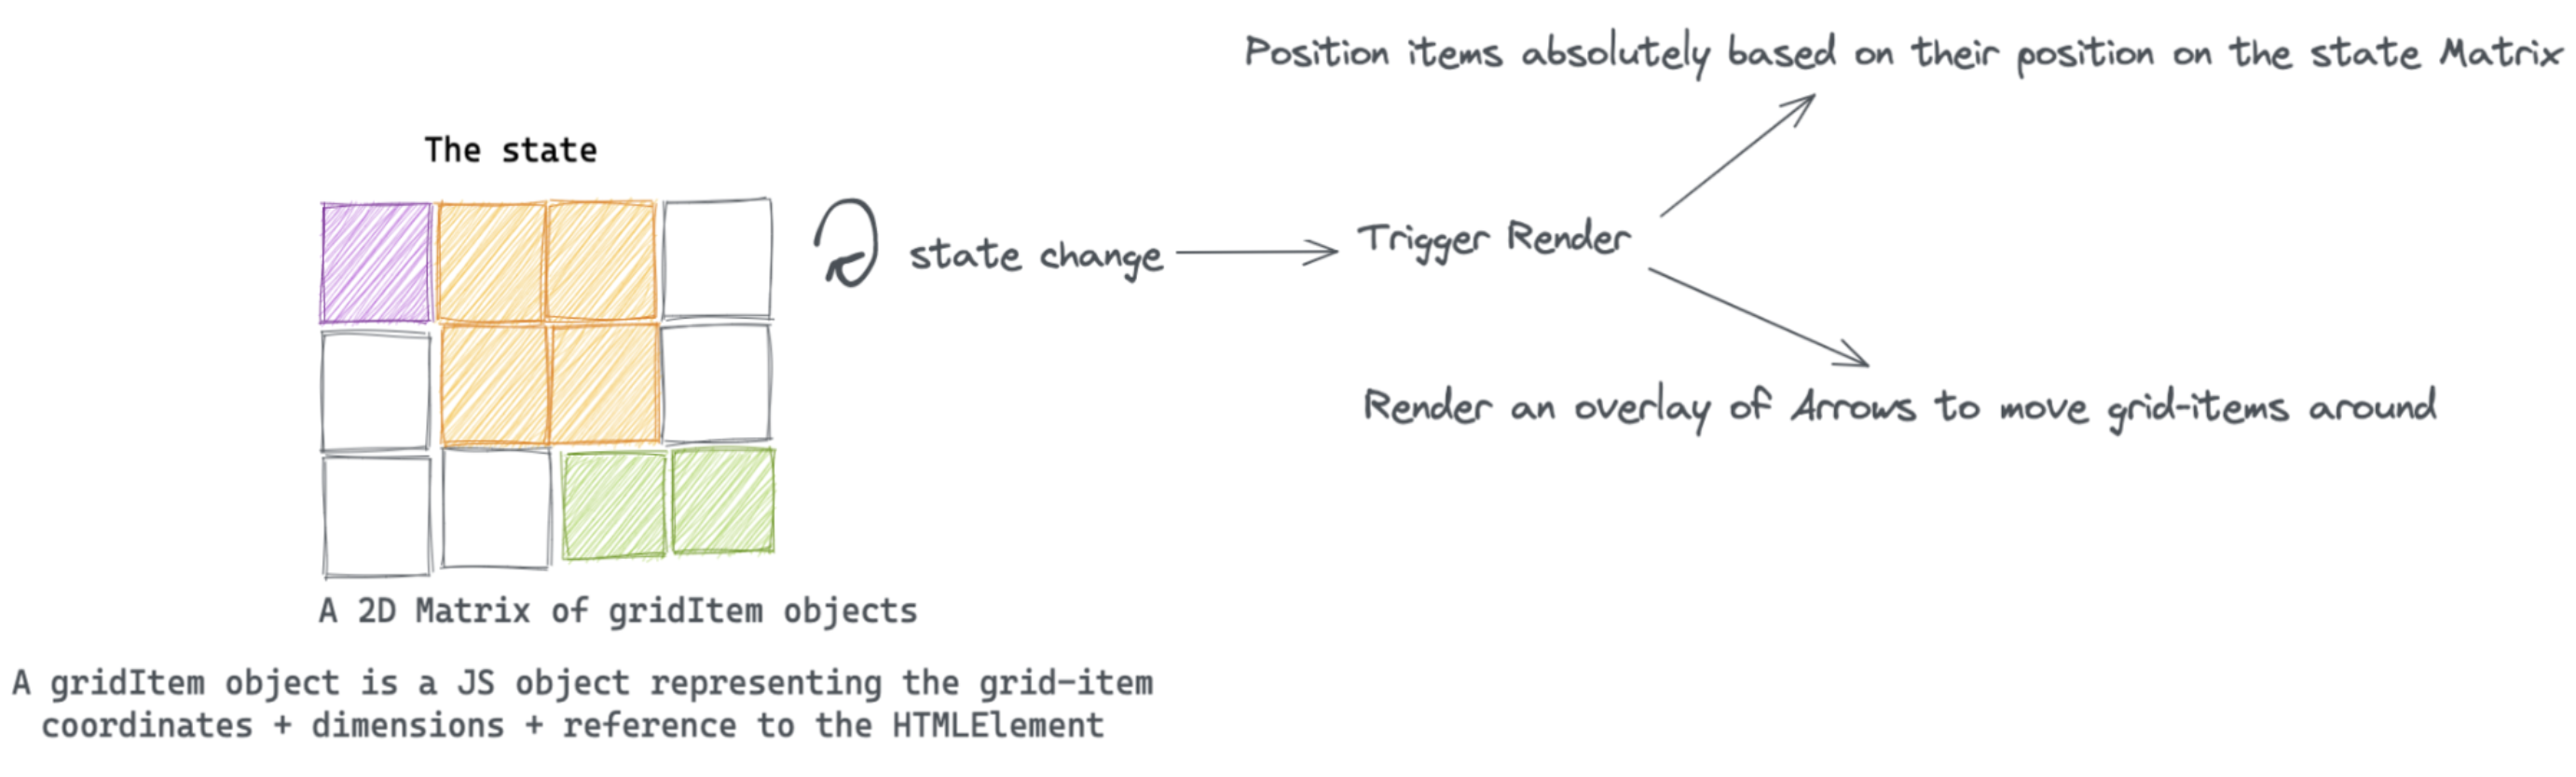 State change triggers re-rendering